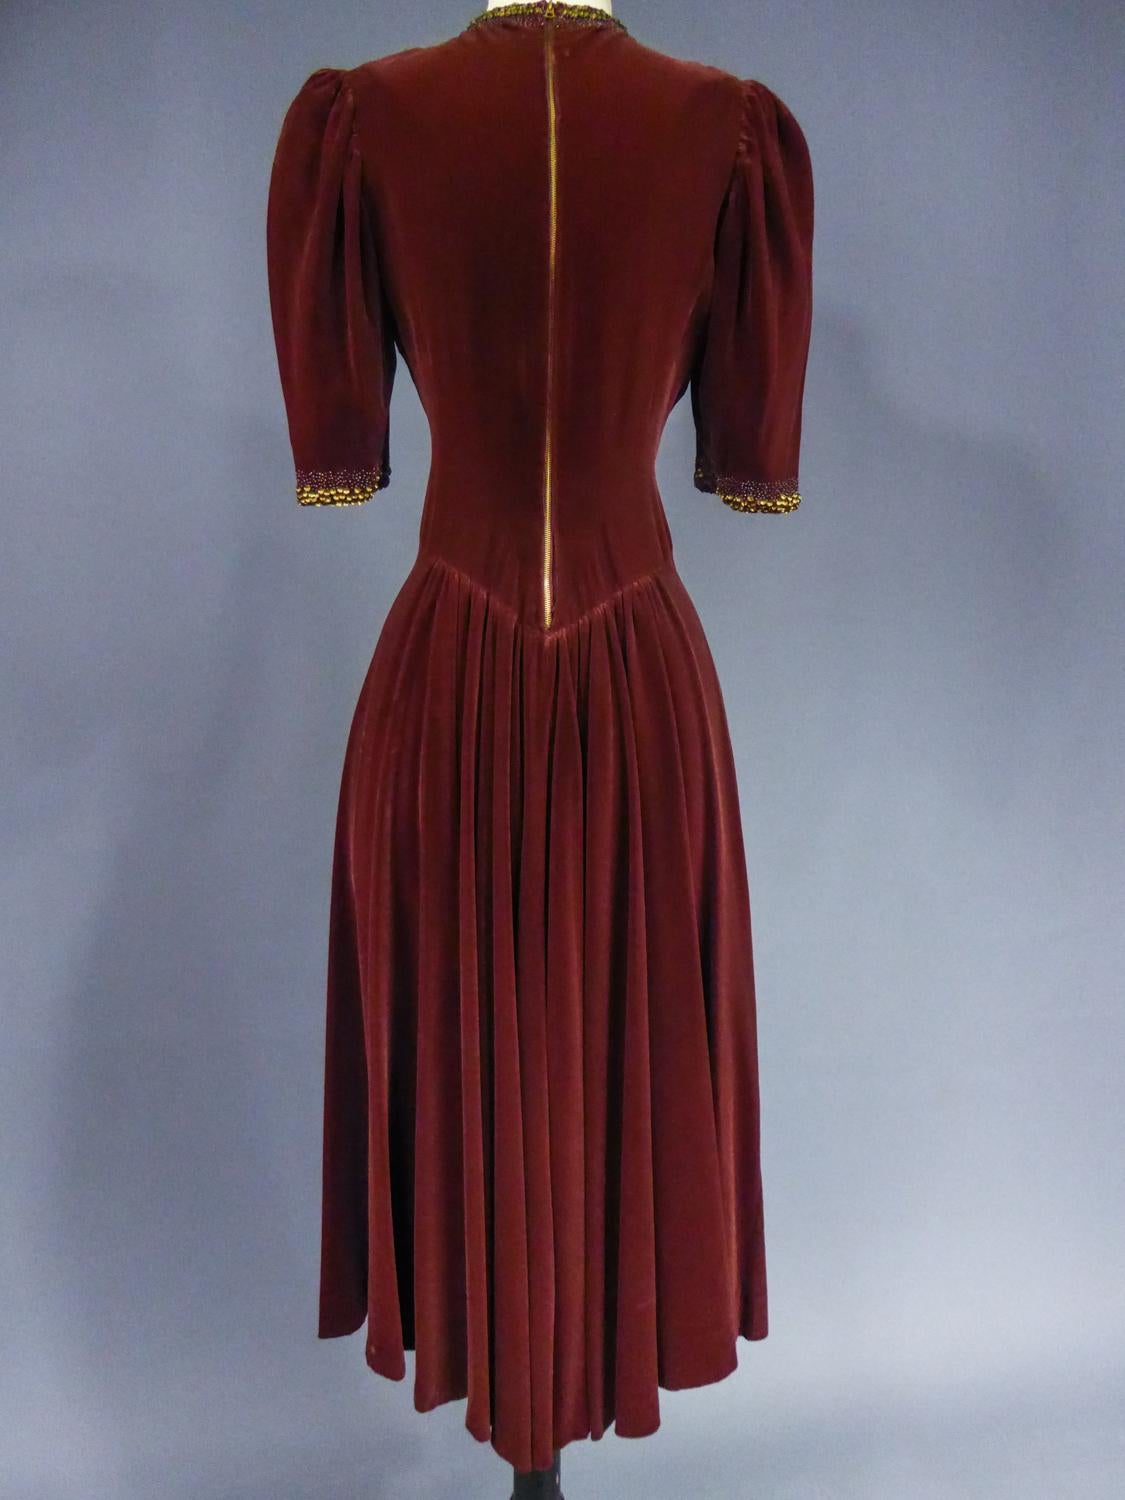 A French Couture Beaded Chocolate Velvet Dress Circa 1940-1950 For Sale 1